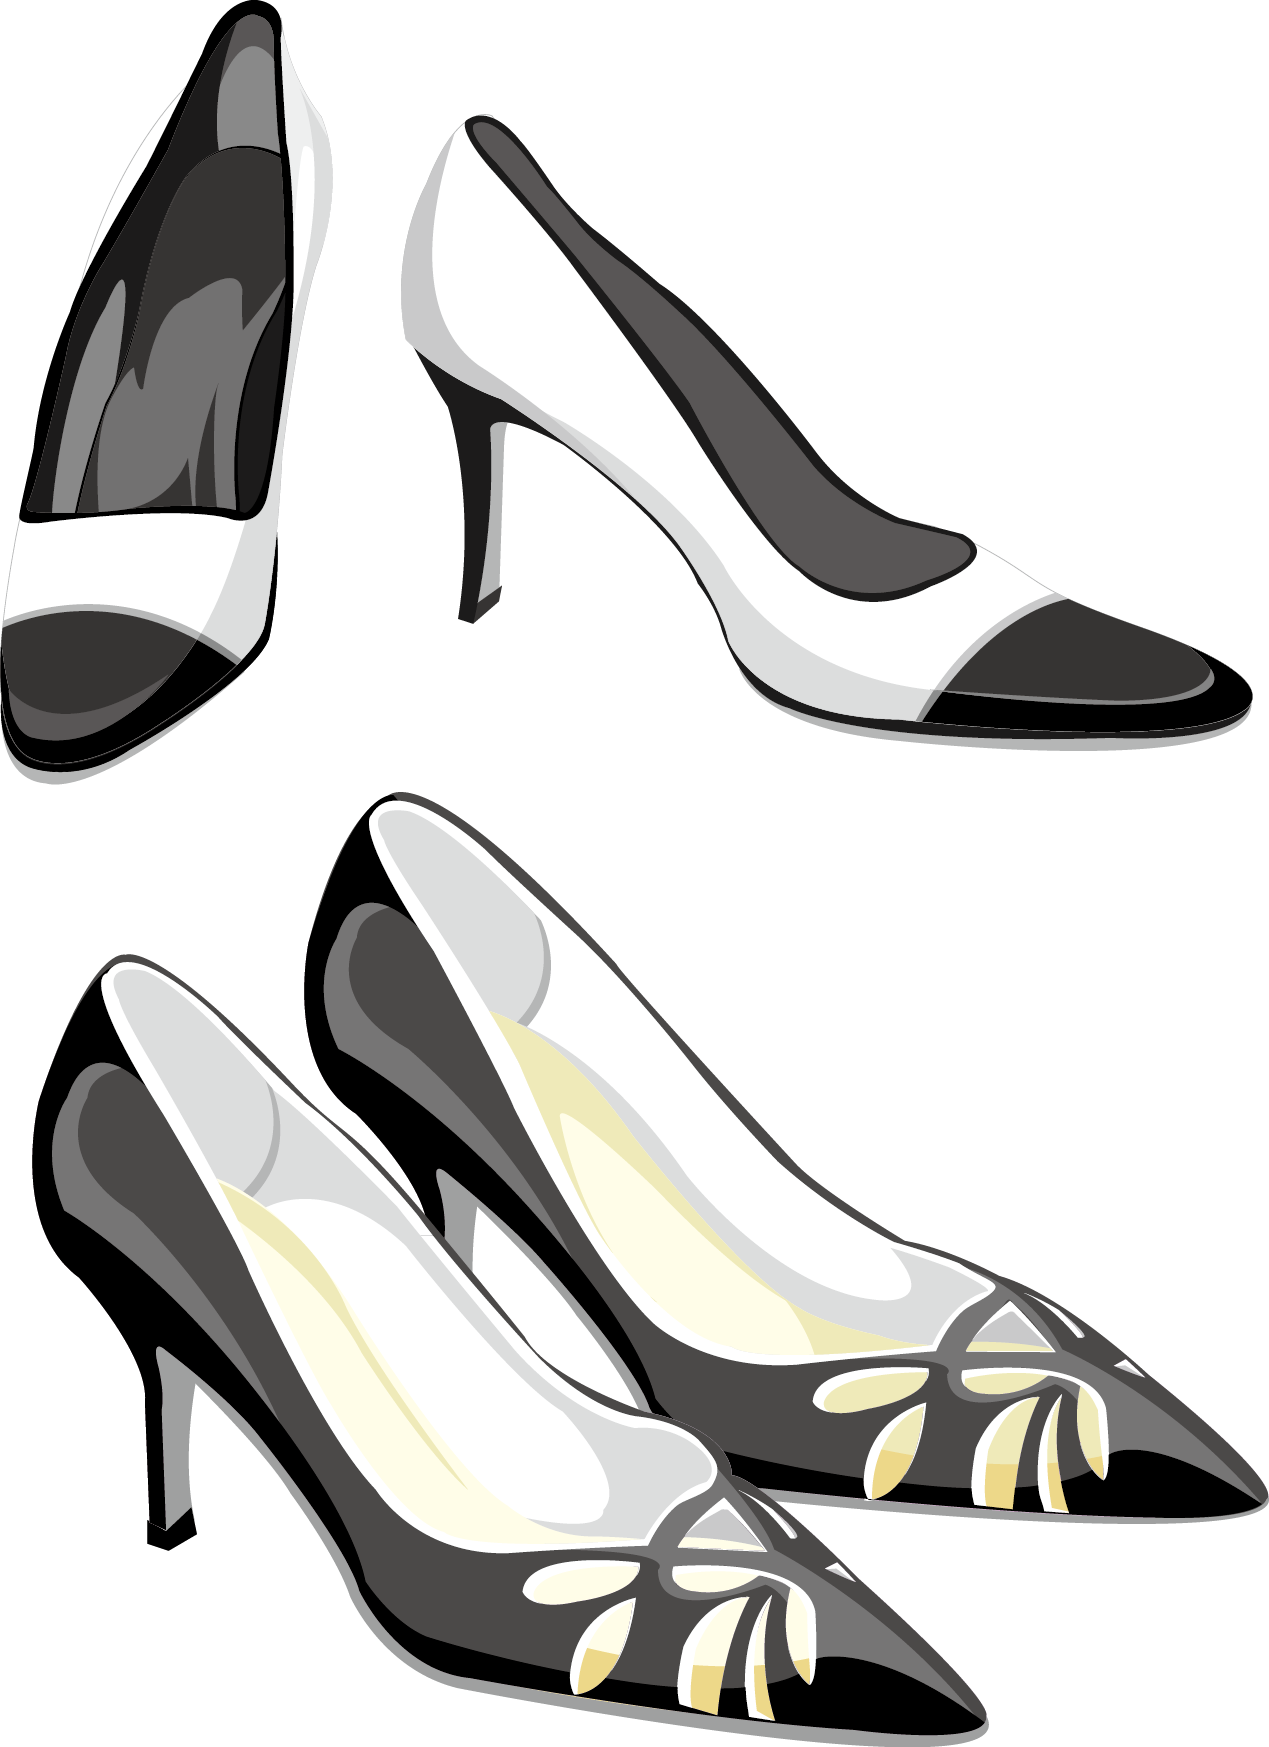 Clothing Accessories Clip Art - Clothing Accessories Clip Art (1269x1747)